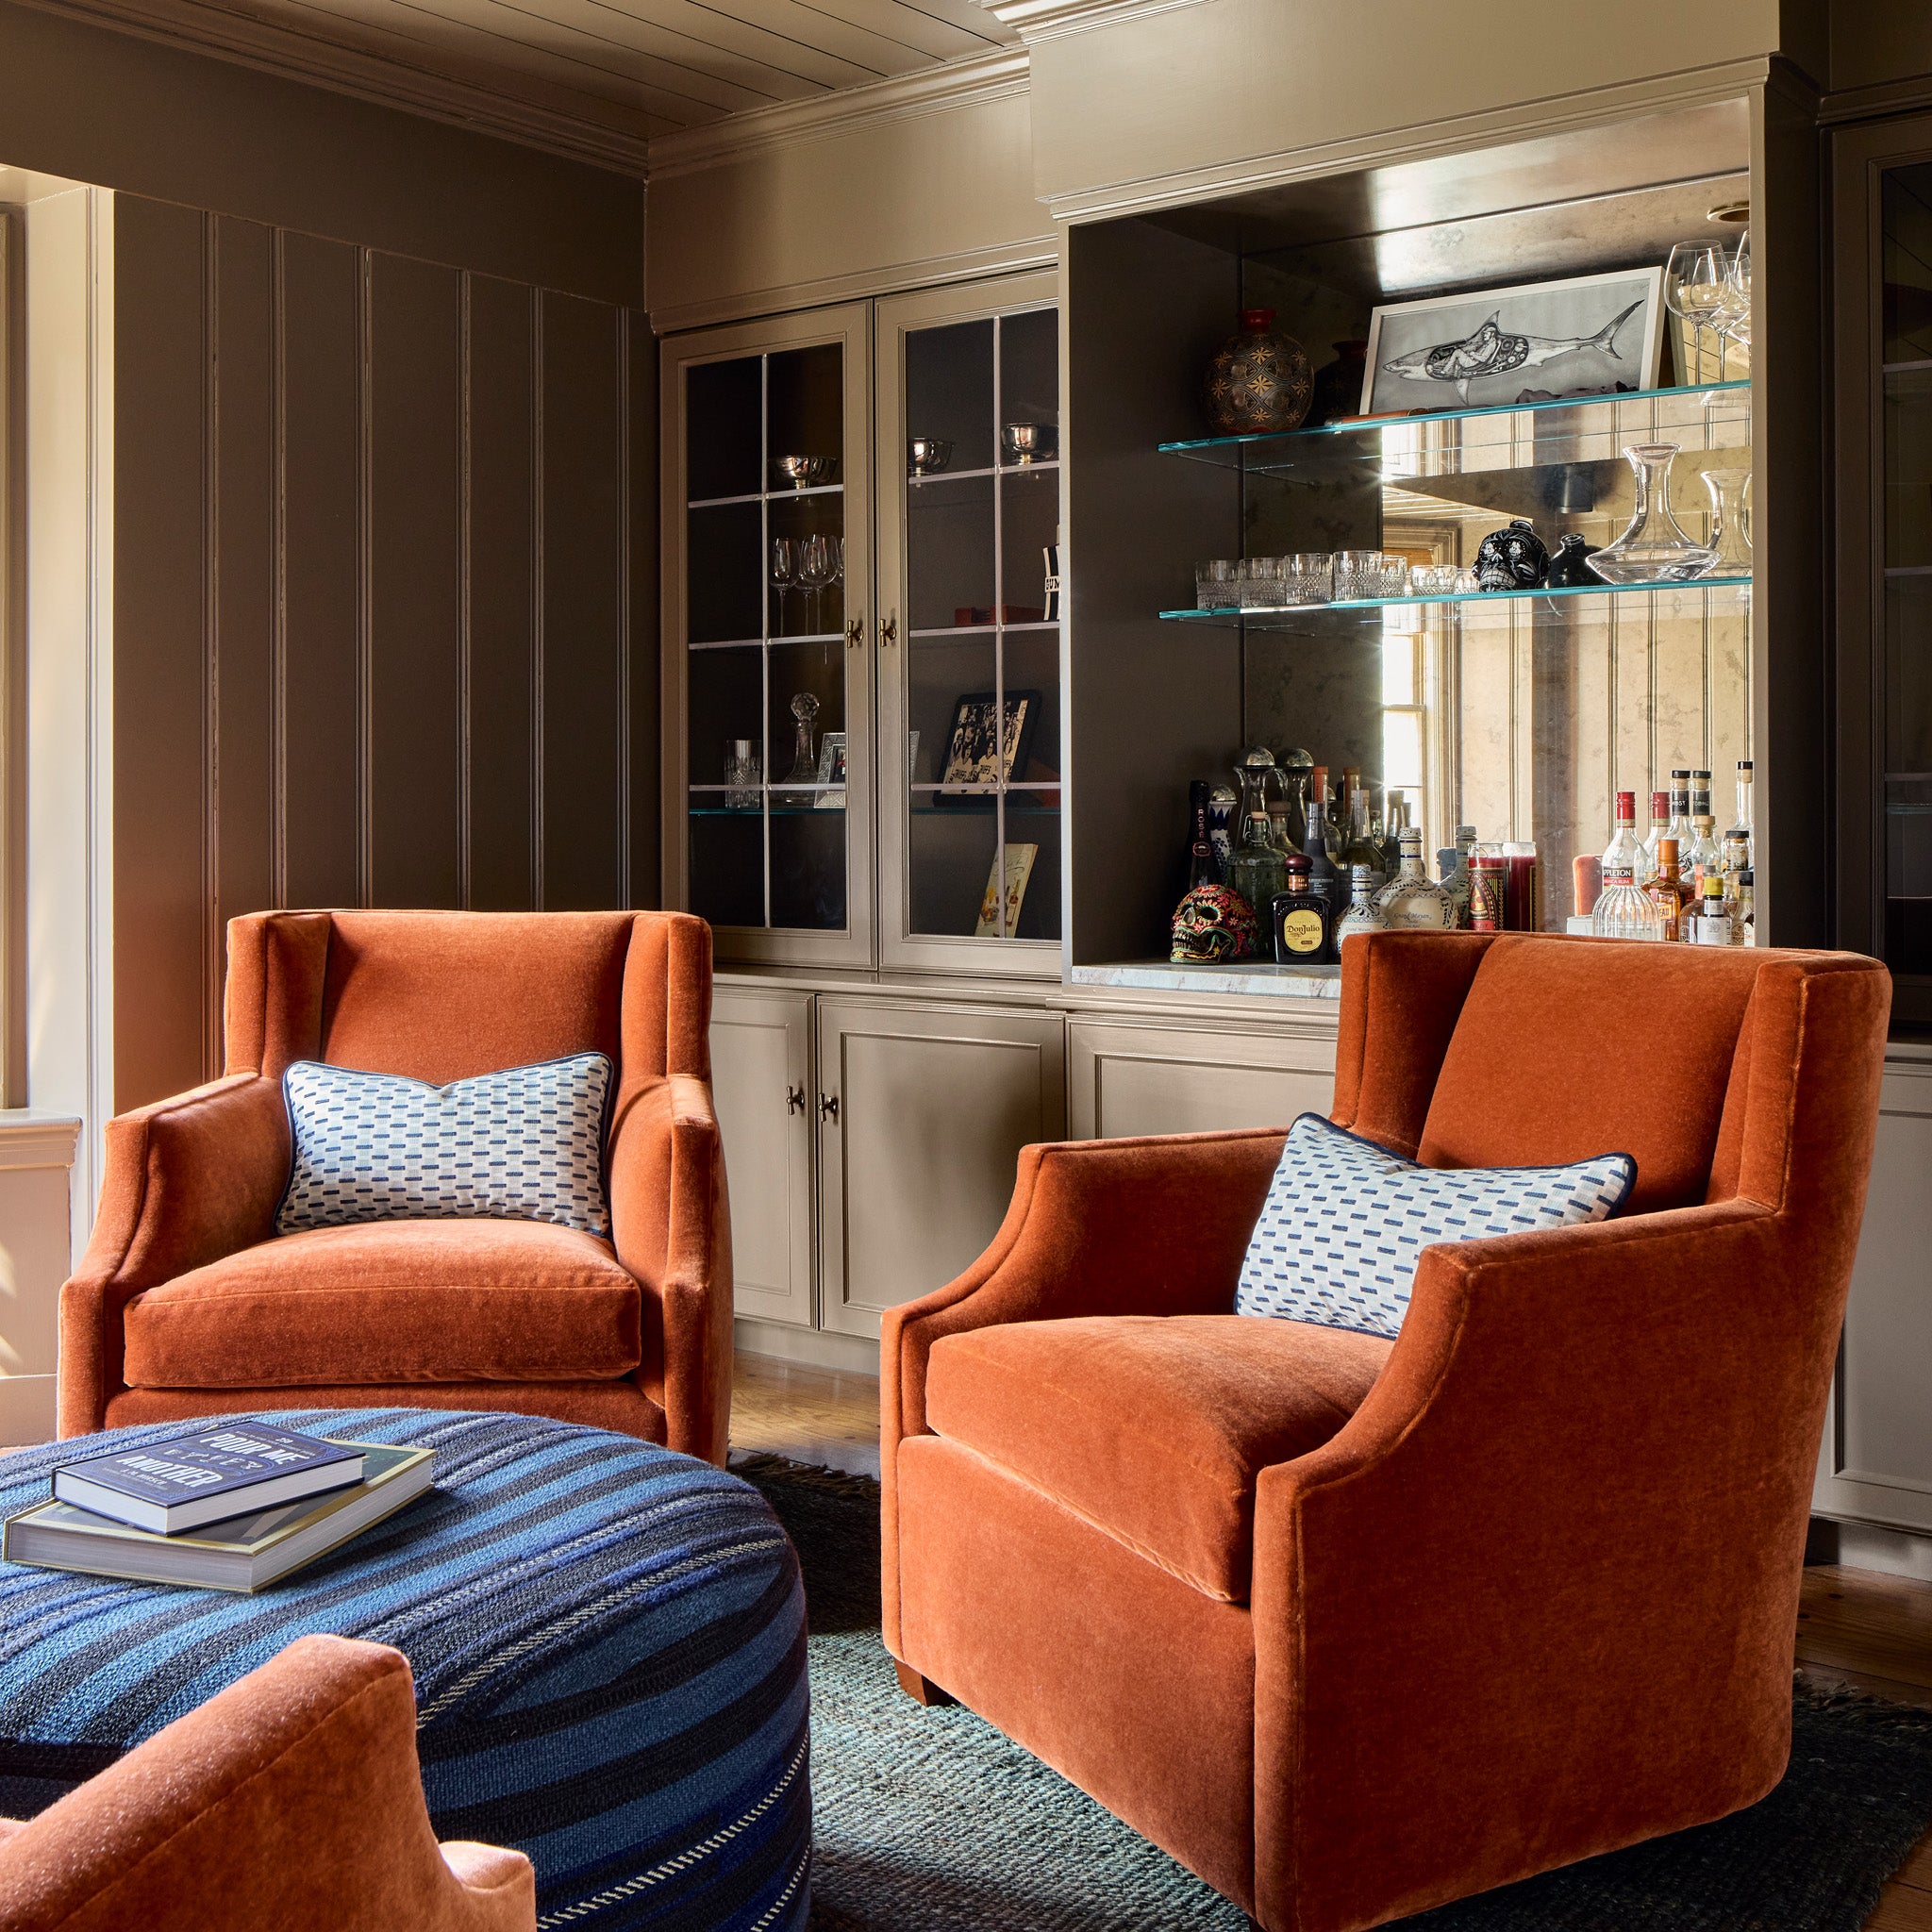 burnt orange chairs with blue geometric pillows on them and a navy blue ottoman stacked with books